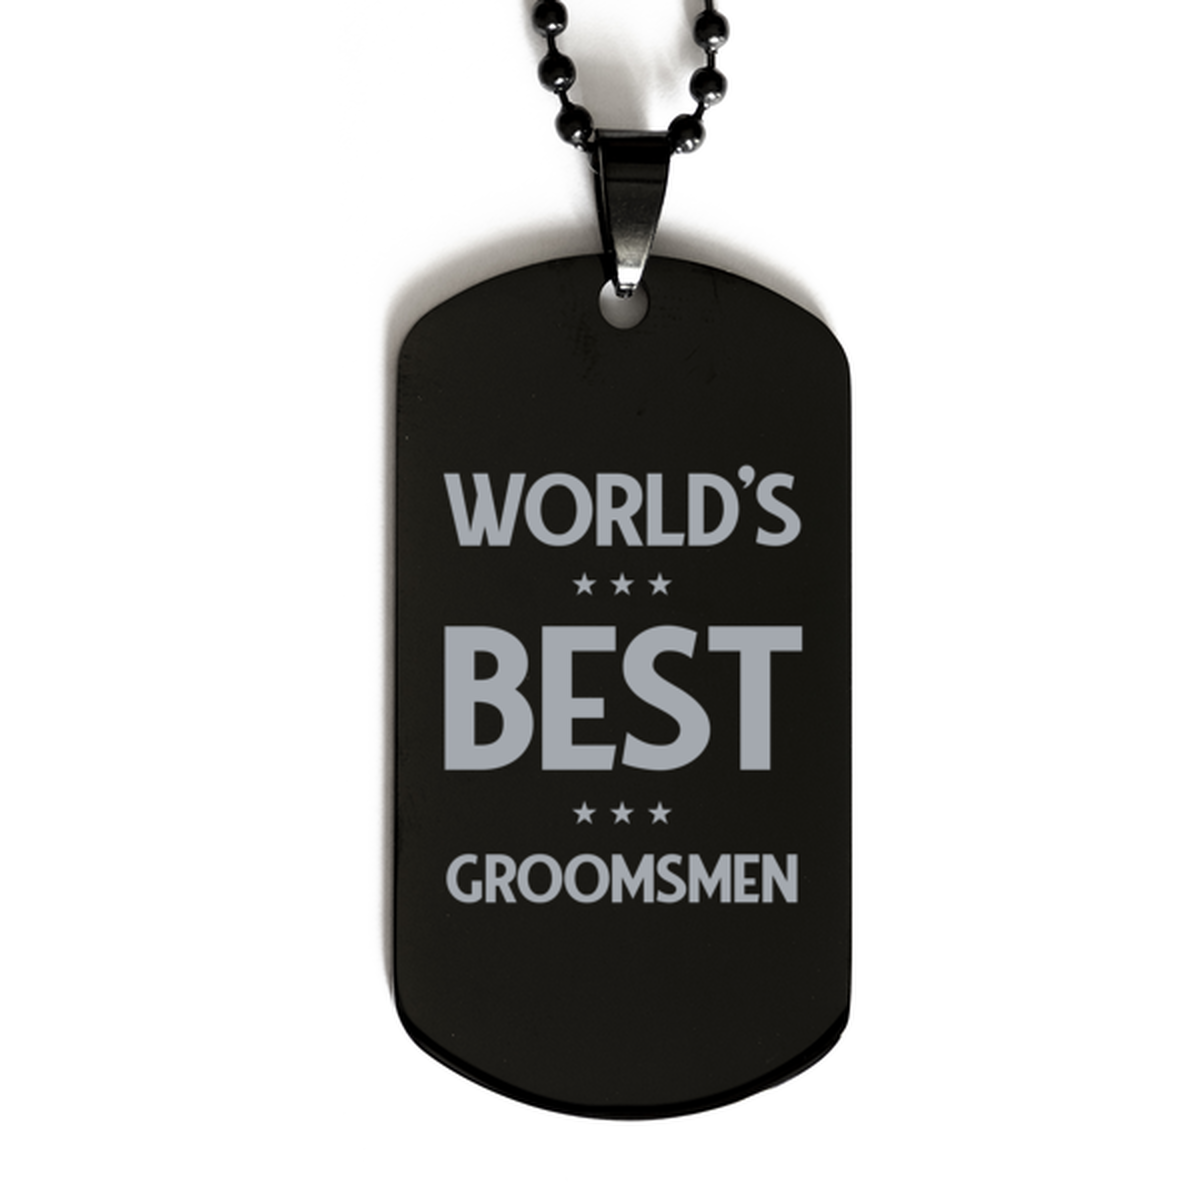 Worlds Best Bridemaid Gifts, Funny Black Engraved Dog Tag For Bridemaid, Birthday Presents For Women